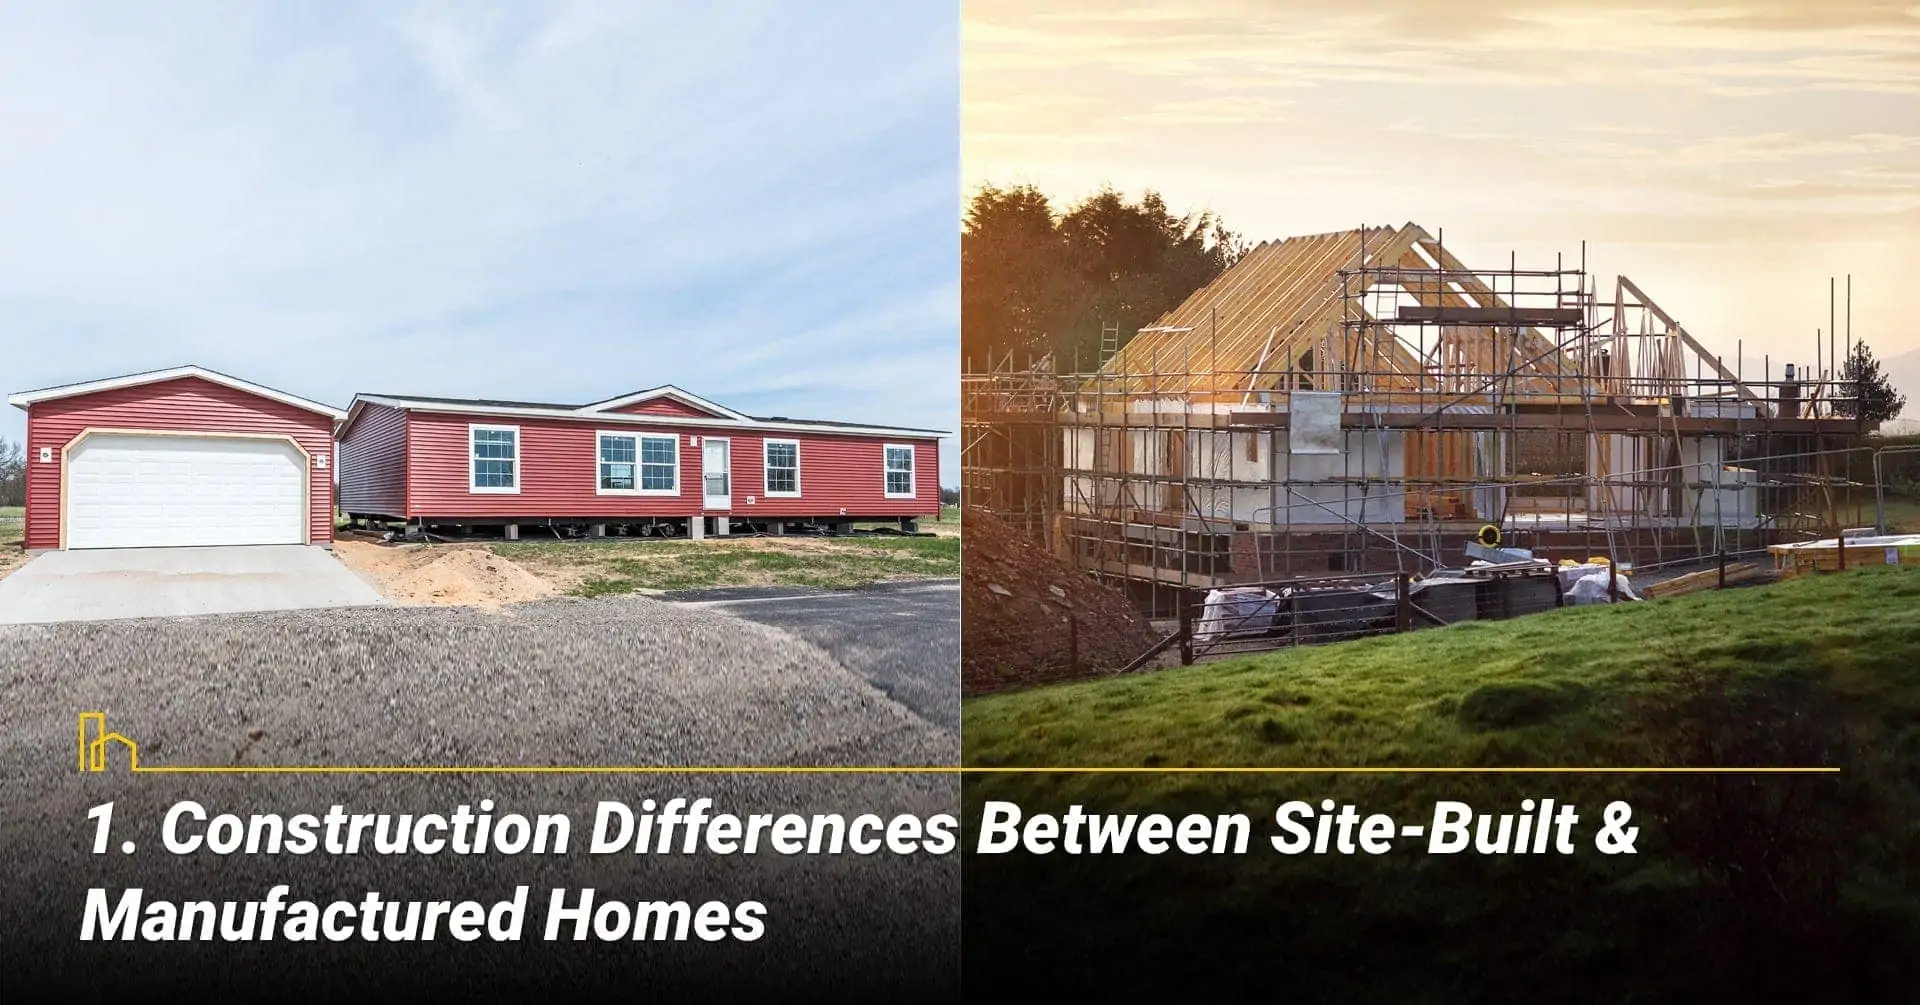 Construction Differences Between Site-Built & Manufactured Homes, they are built differently